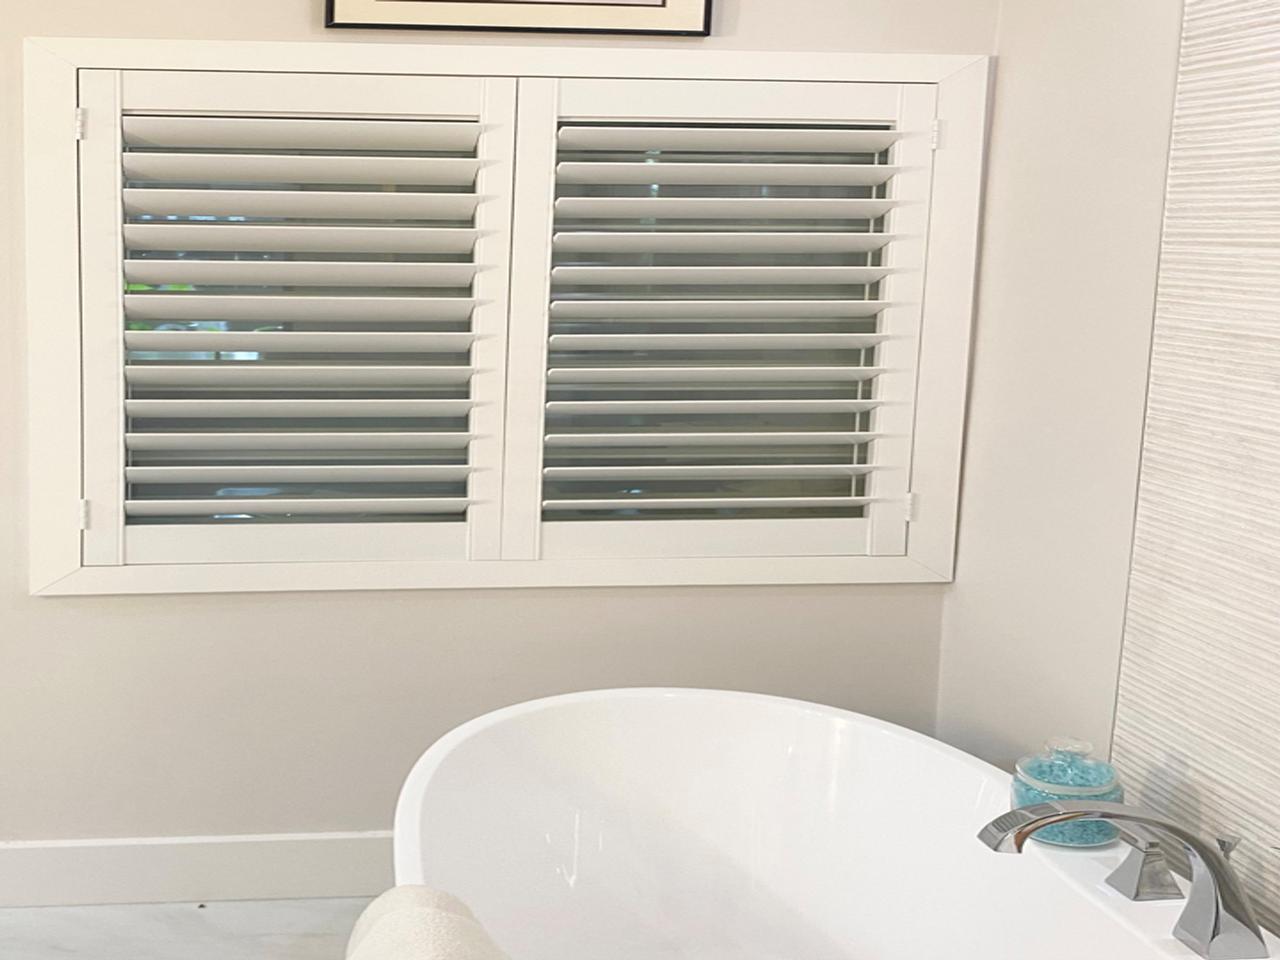 Bathroom with Louverwood shutters